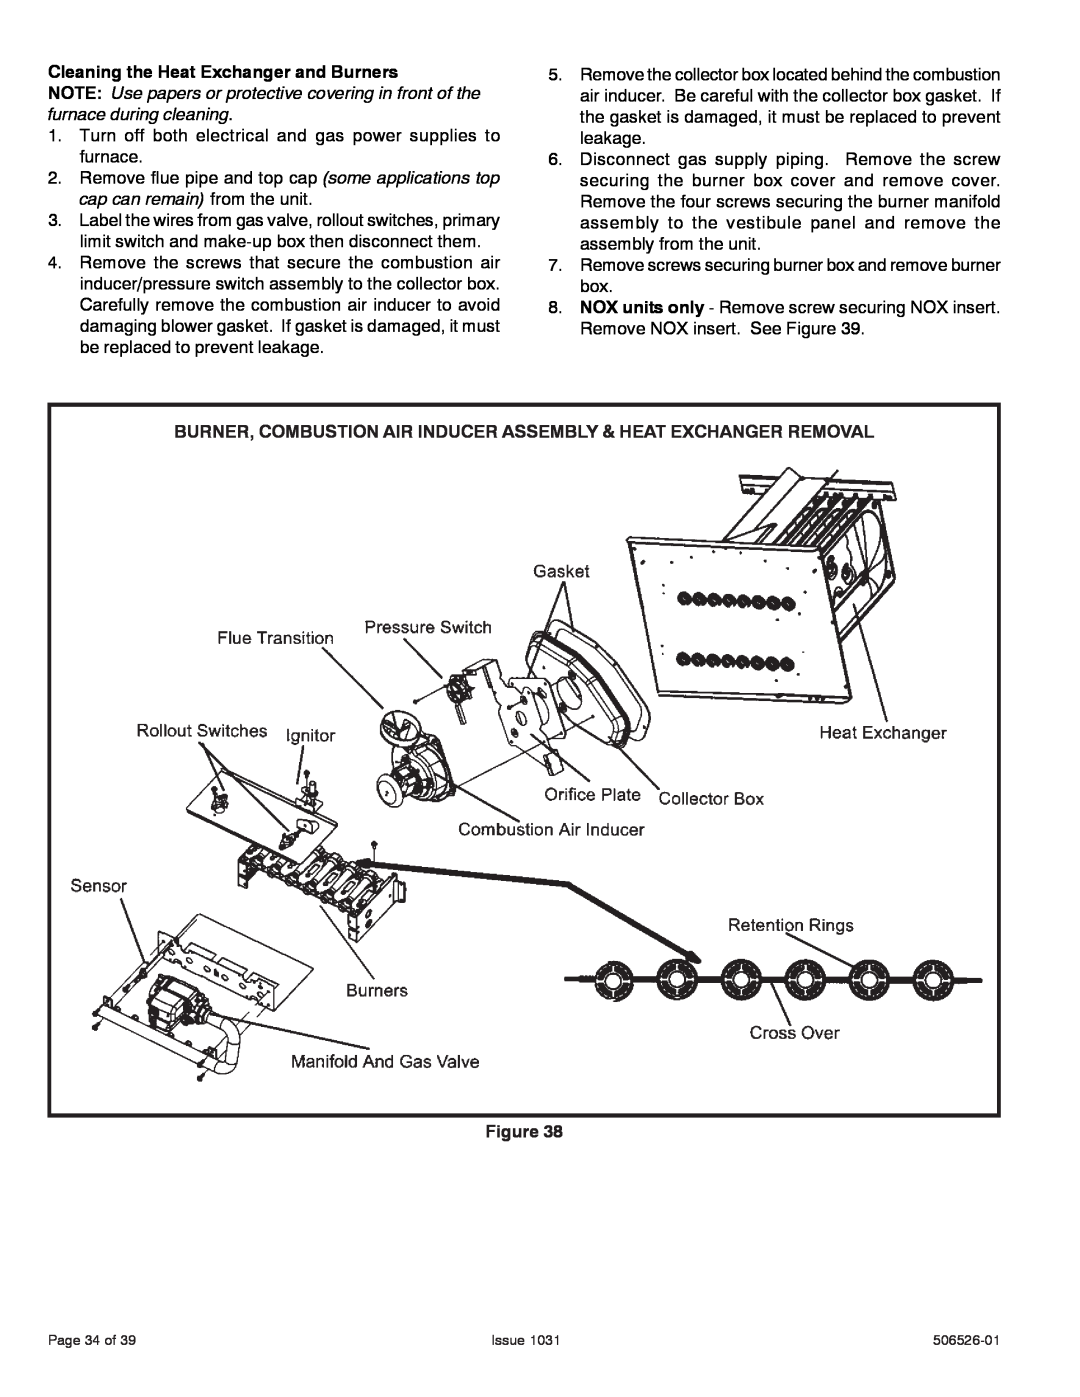 Allied Air Enterprises A80UH, 80G1UH Cleaning the Heat Exchanger and Burners, Page 34 of, Issue, 506526-01 